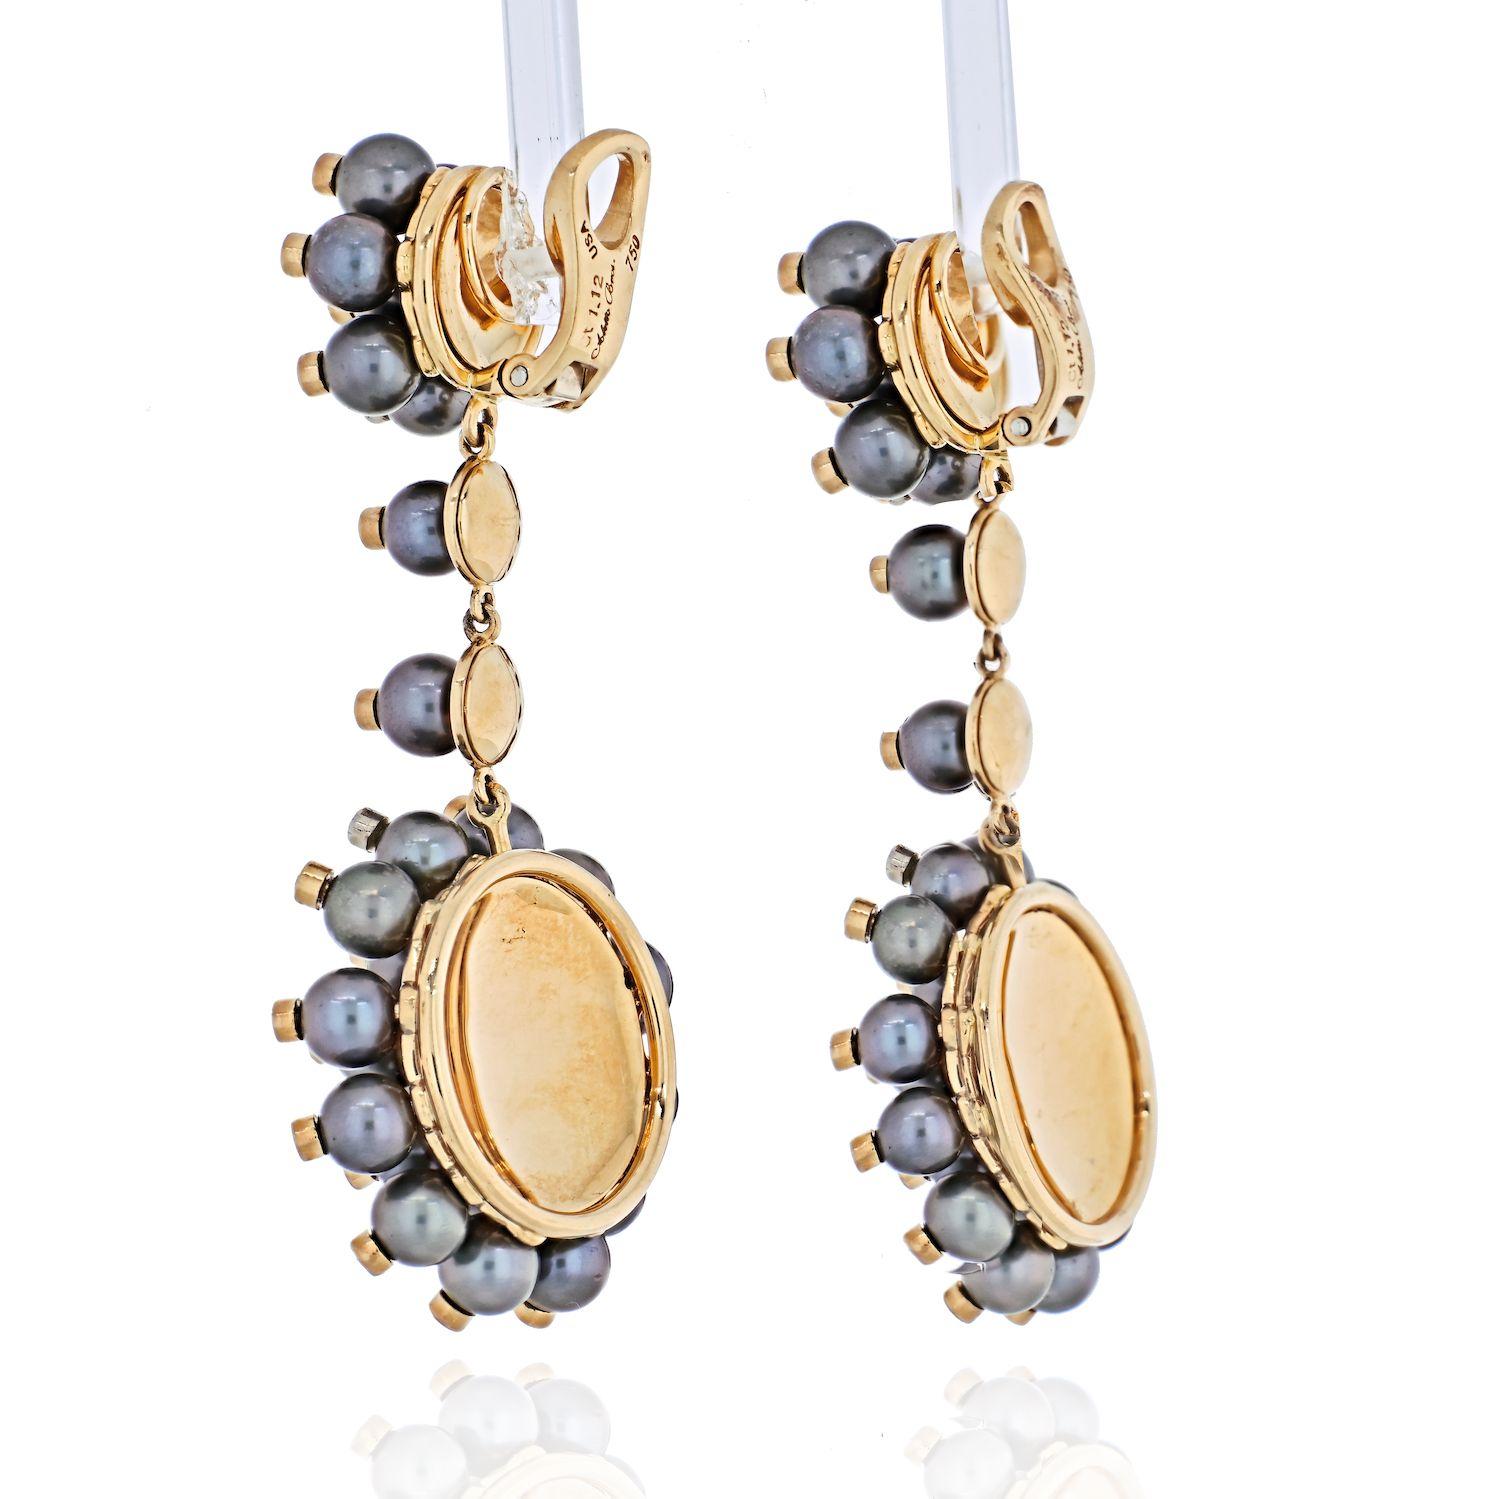 Modern Aletto Brothers 18 Karat Yellow Gold Diamond, Cultured Pearl Dangling Earrings